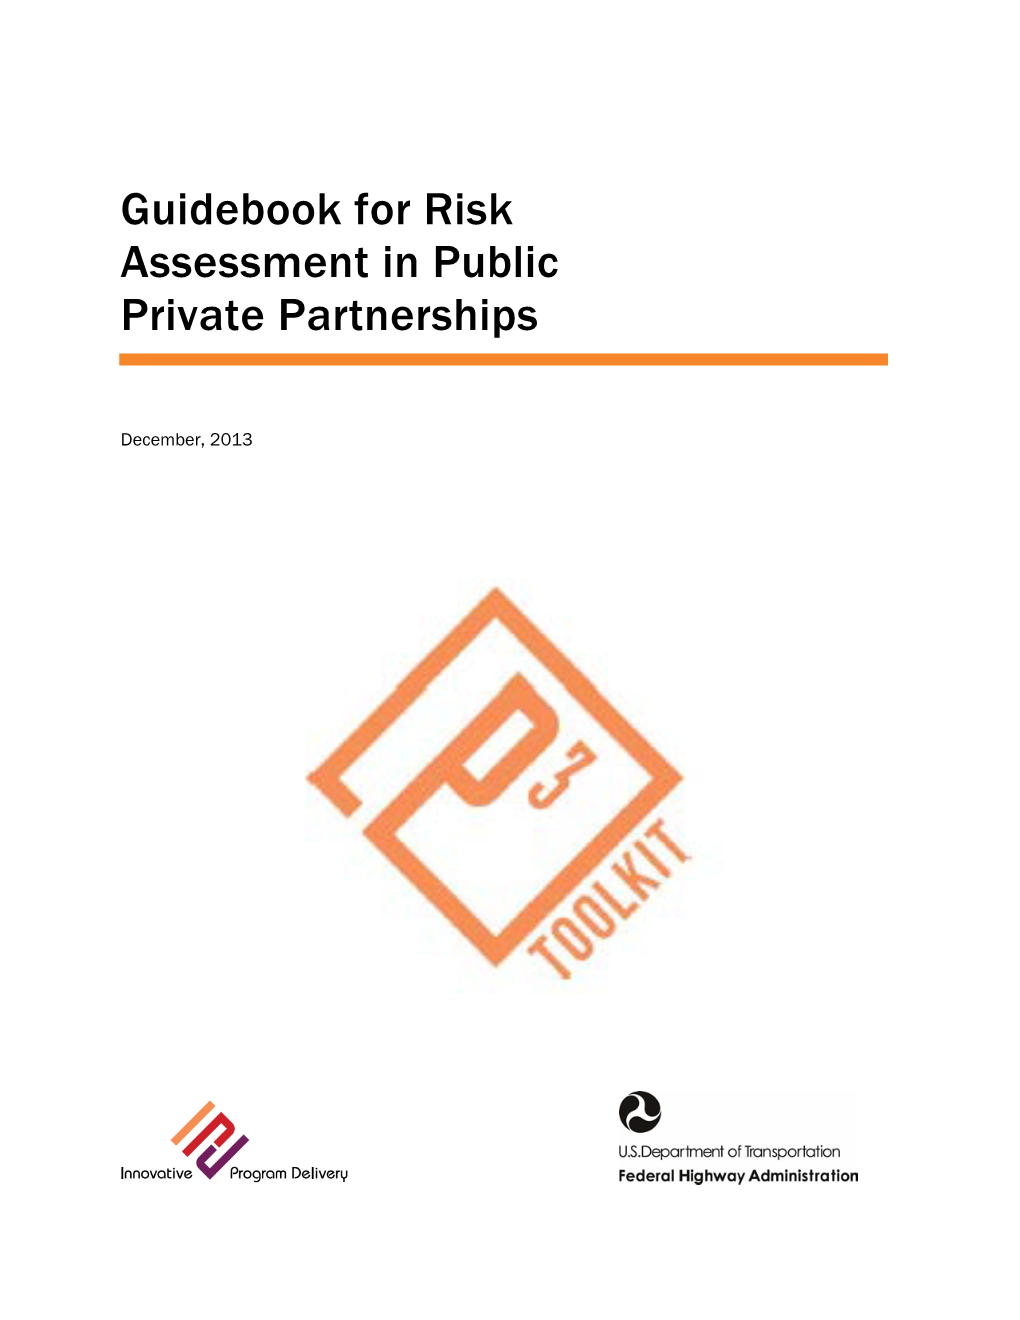 Guidebook for Risk Assessment in Public Private Partnerships